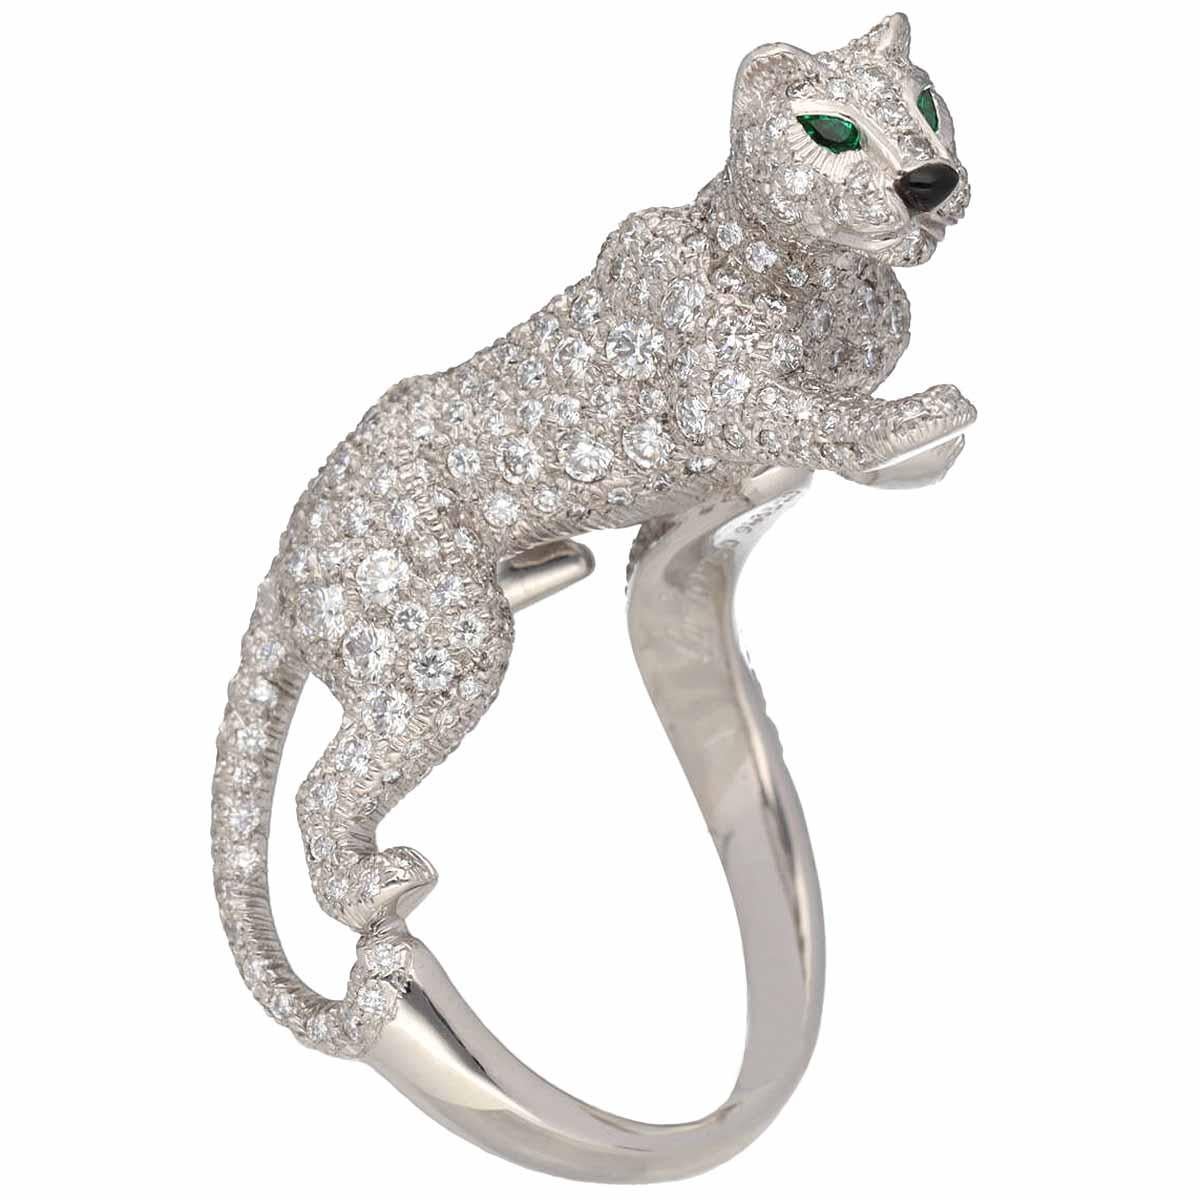 Brand:Cartier
Name:Panthere Sookie Ring
Material:Diamonds, 2 emeralds, 1 onyx,750 K18 WG white gold
Weight:16.2g（Approx)
Ring size(inch):EU：54/USA：6.25（Approx)
Width(inch):3.73mm / 0.14in（Approx)
Top size:10.68mm×38mm / 0.42in×1.49in（Approx)
Comes